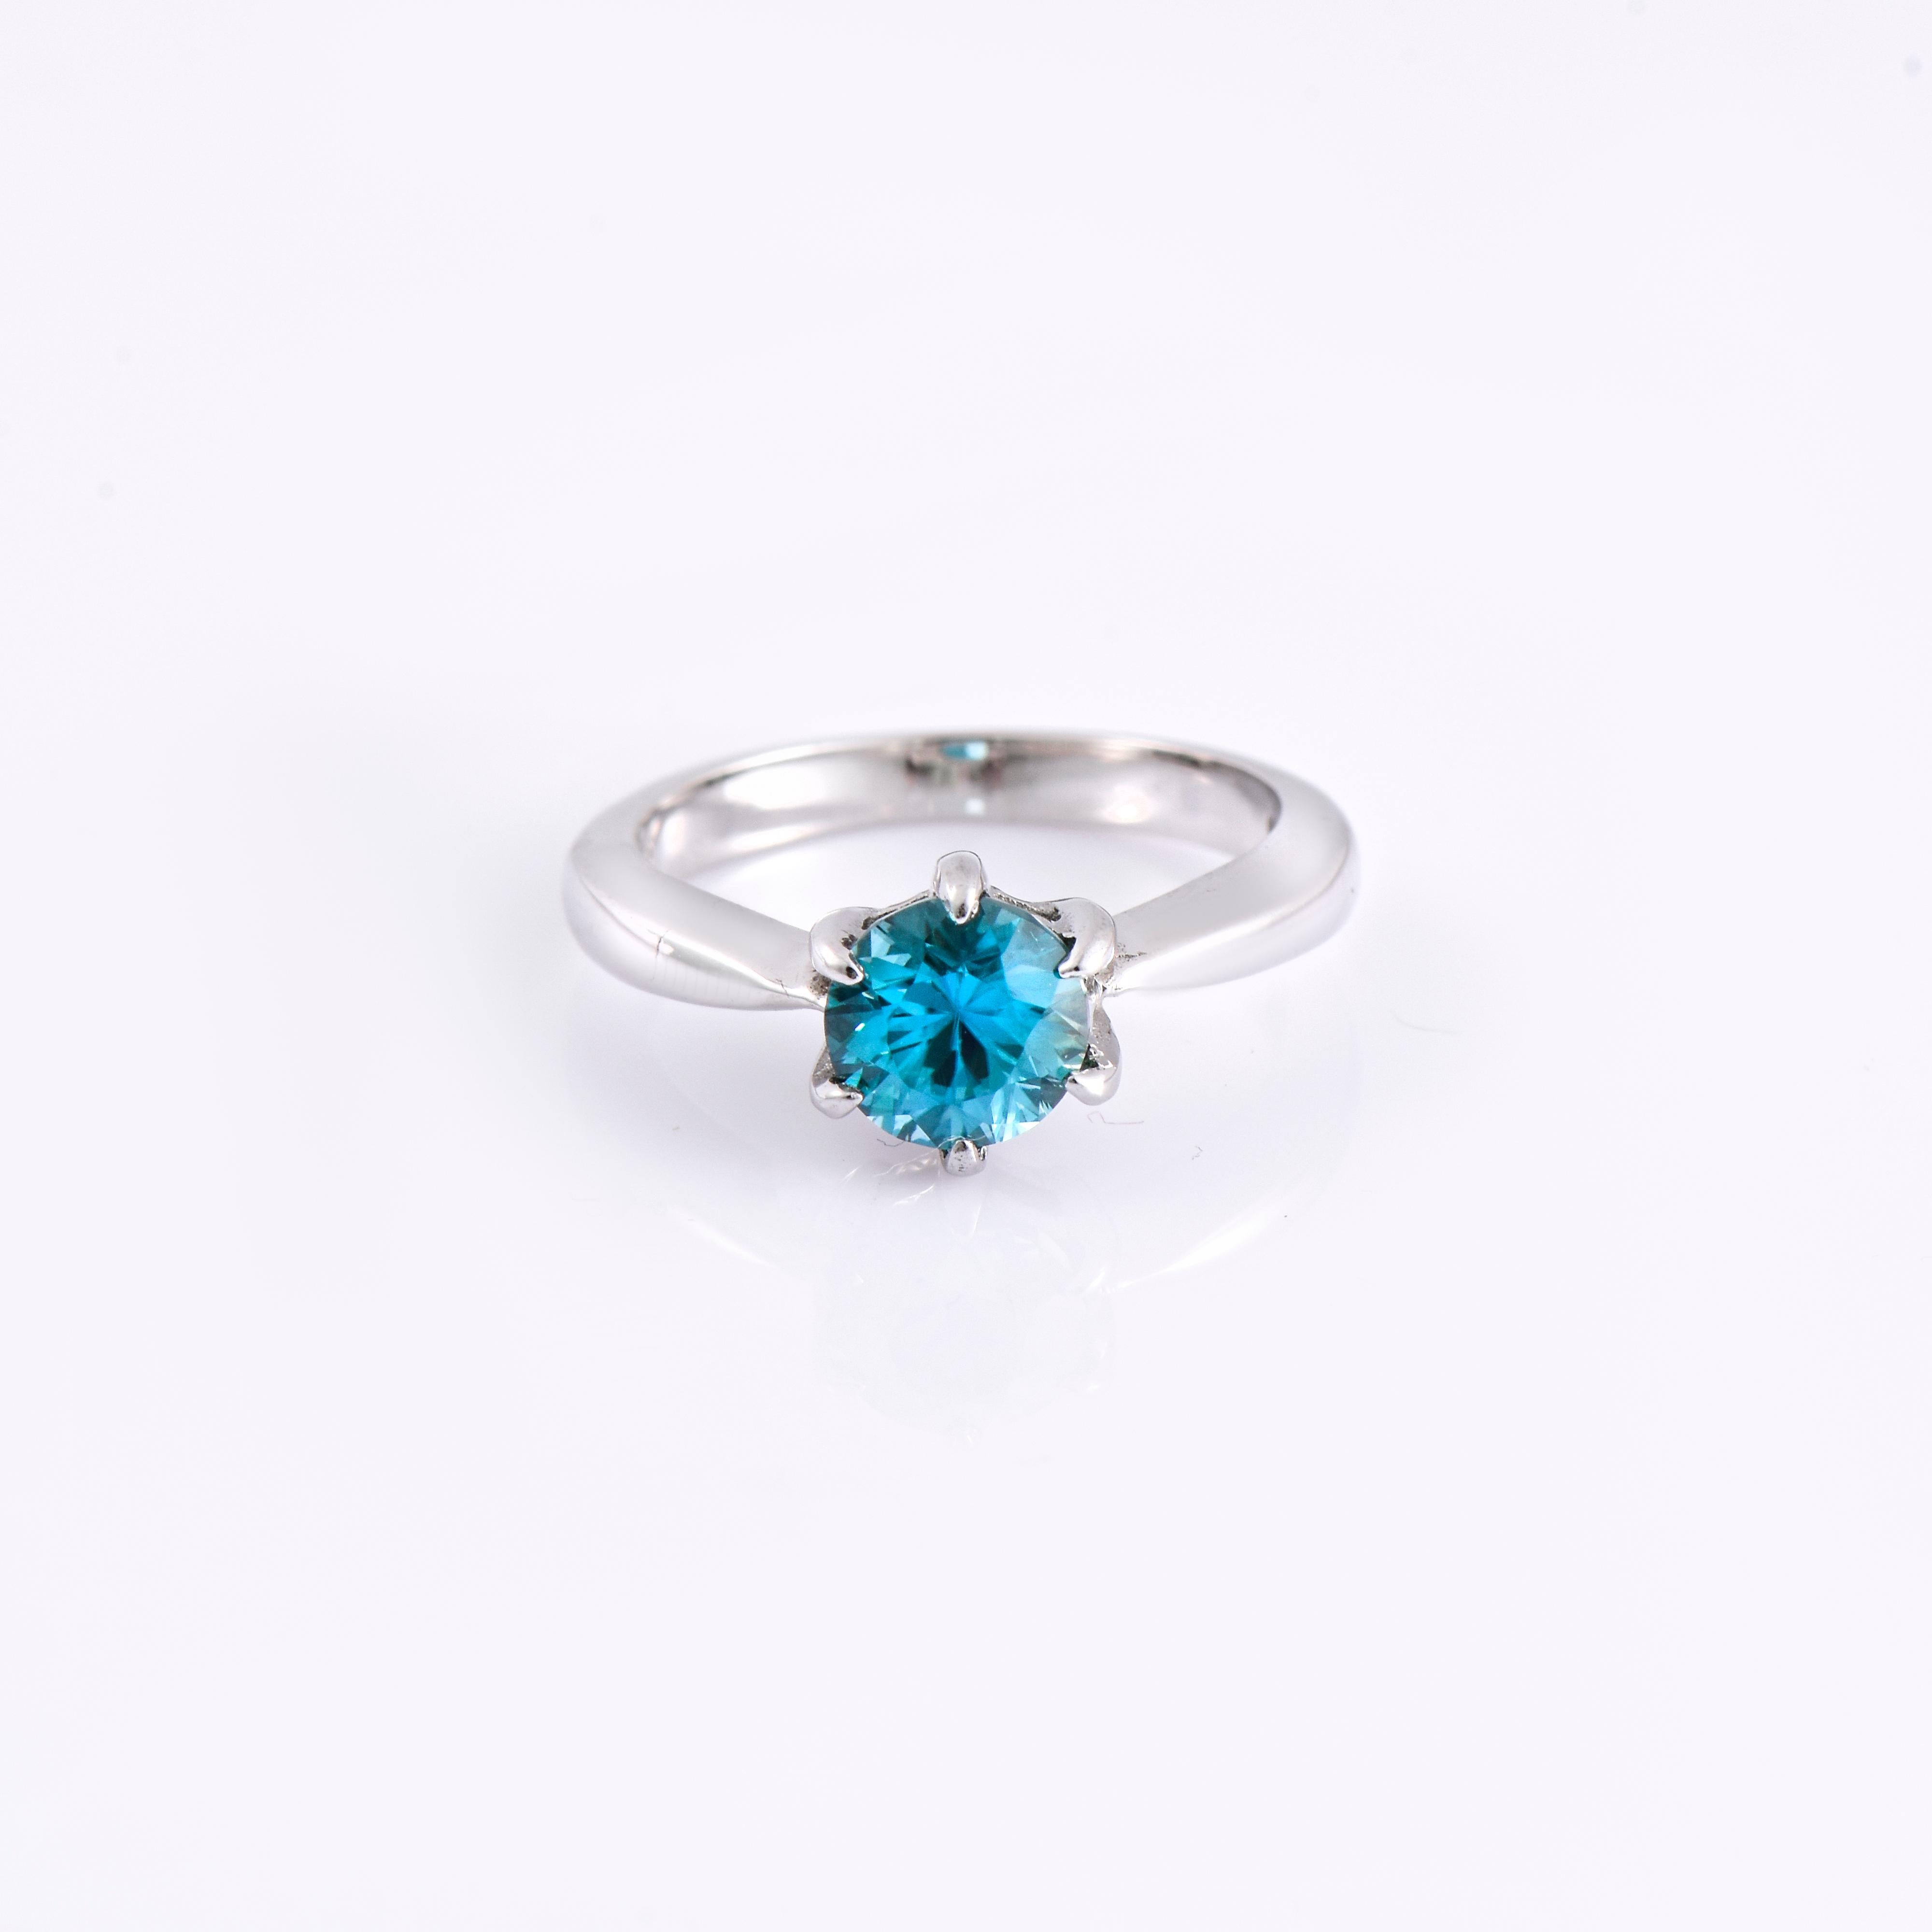 Contemporary Orloff of Denmark, 1.46 ct Natural Blue Zircon Ring in 925 Sterling Silver For Sale